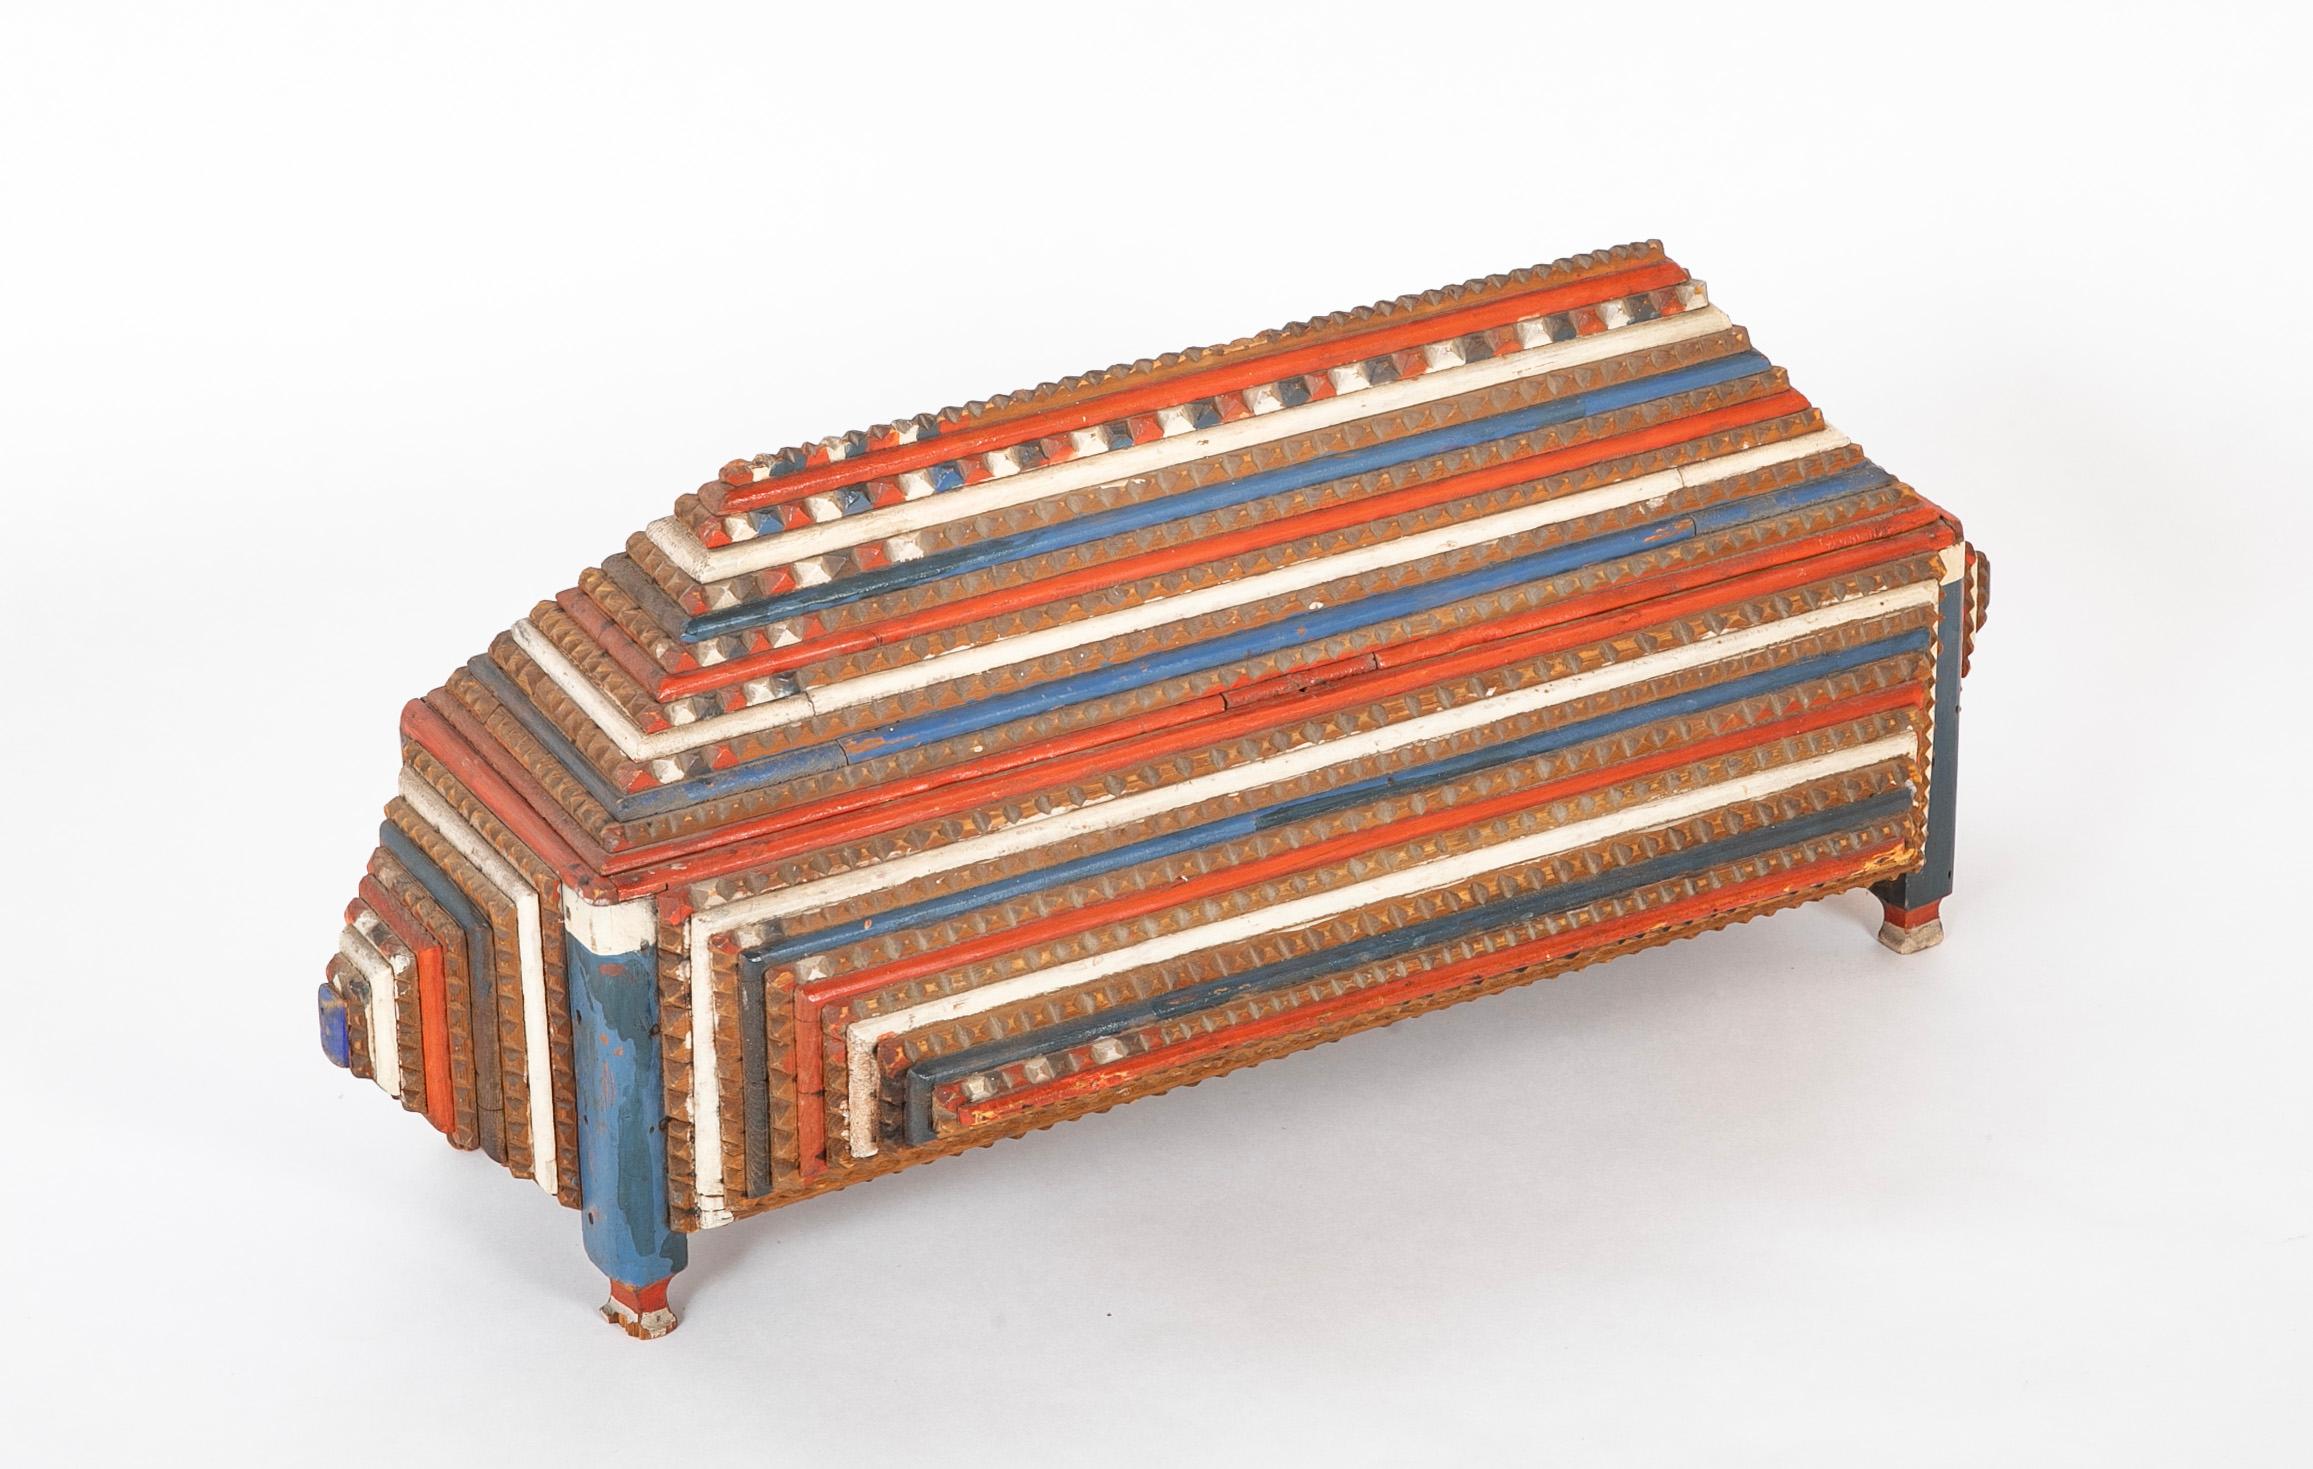 Large Tramp Art box in red, white and blue painted stepped form. 

